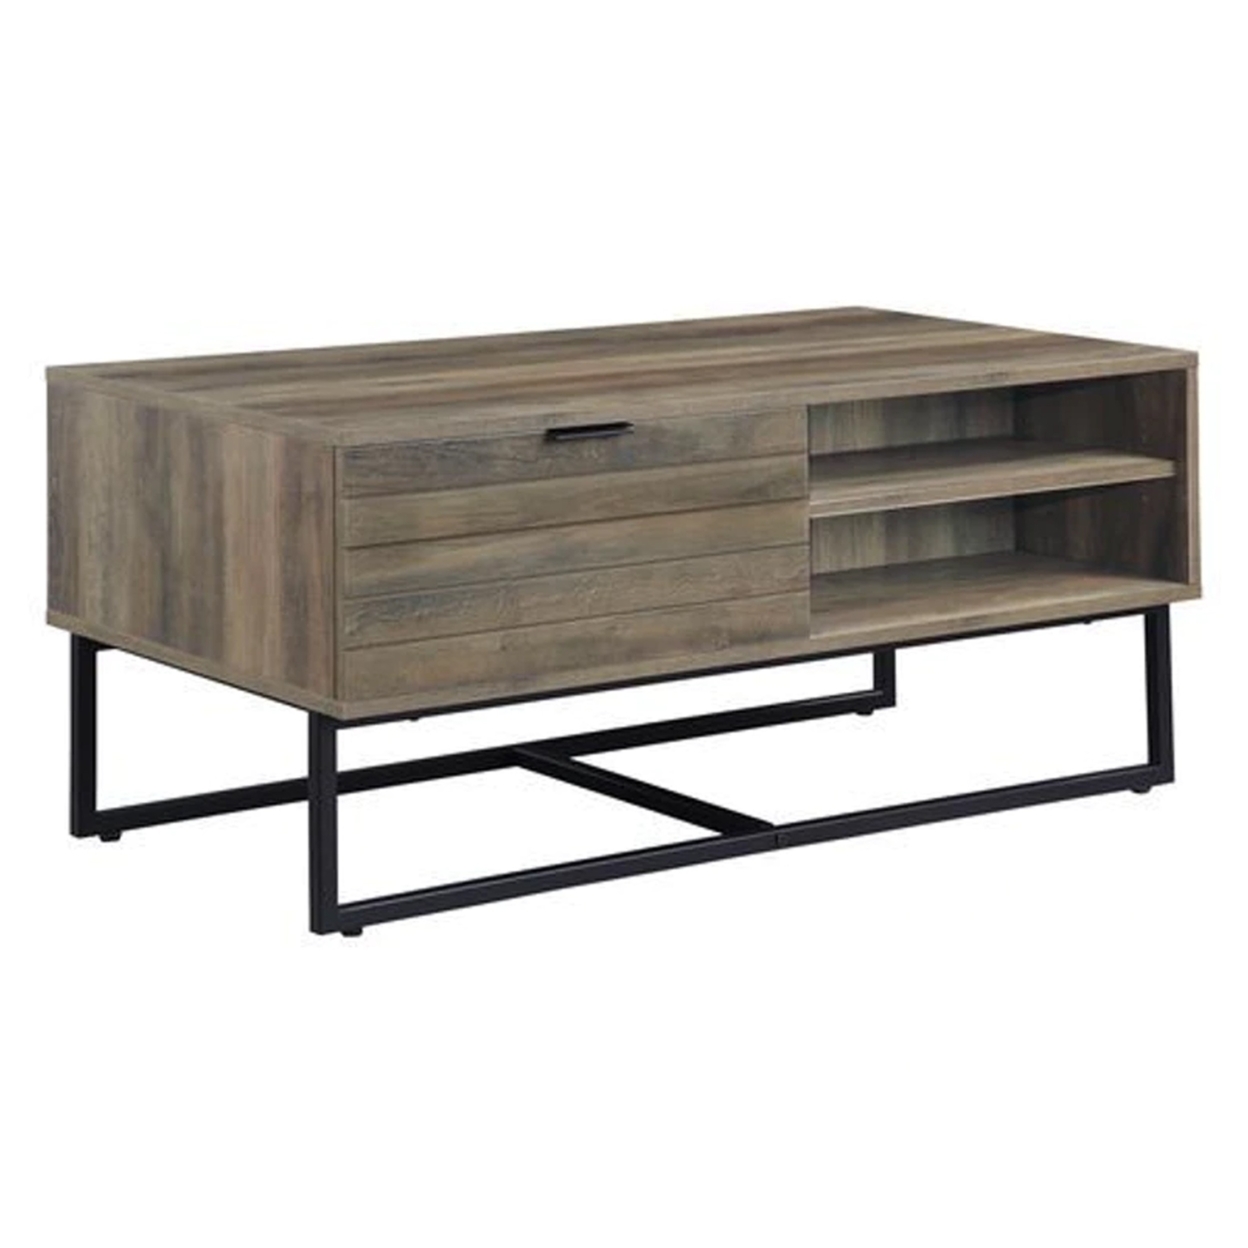 Coffee Table With 2 Open Compartments And Tubular Frame, Oak Brown- Saltoro Sherpi